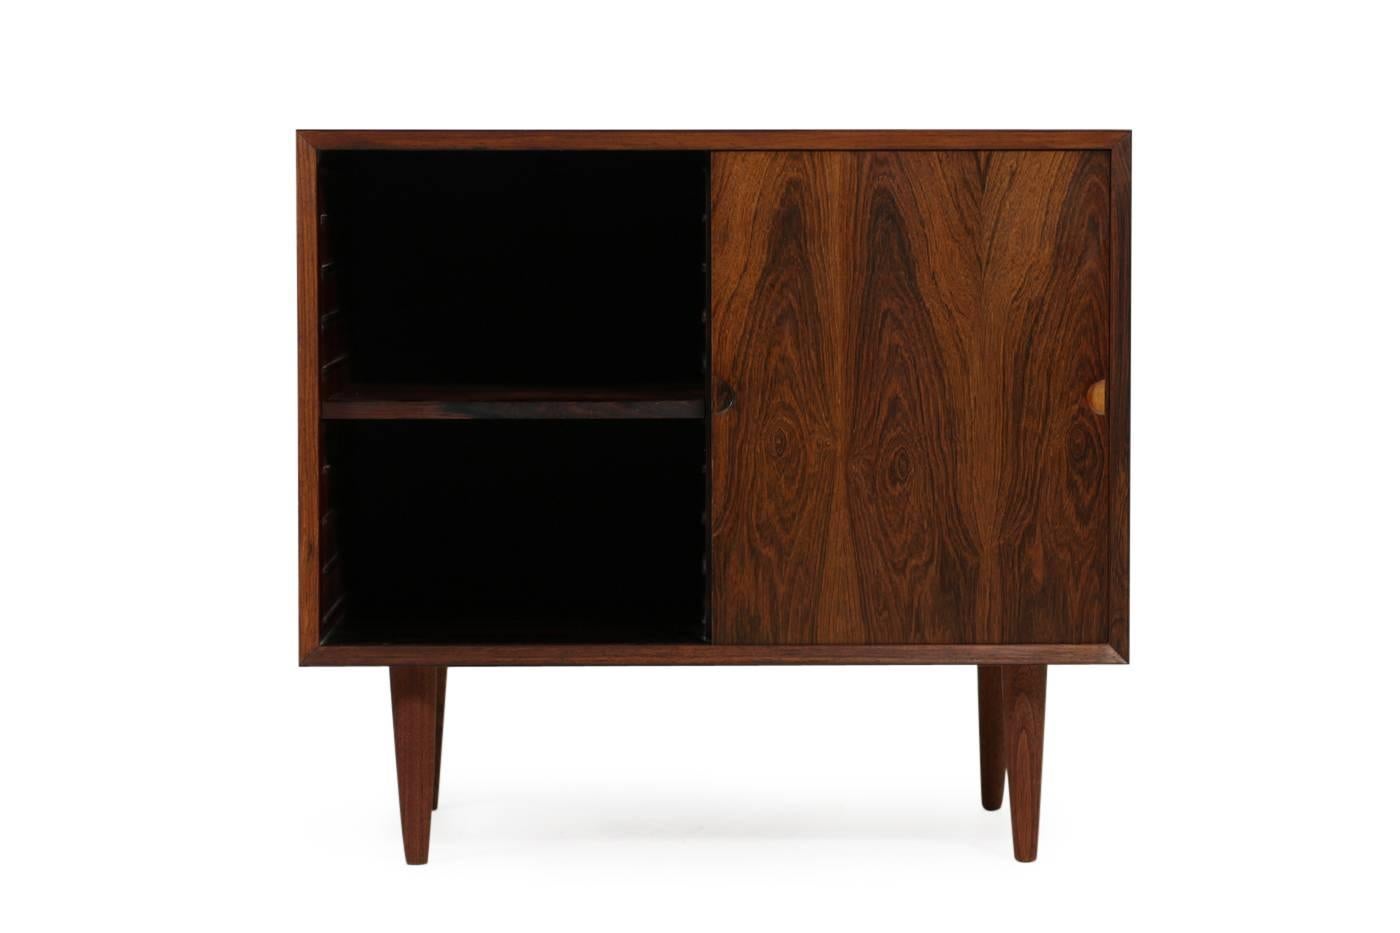 Beautiful Poul Cadovius rosewood sideboard with sliding doors.
Very good condition, another matching sideboard available, pls. check our storefront.